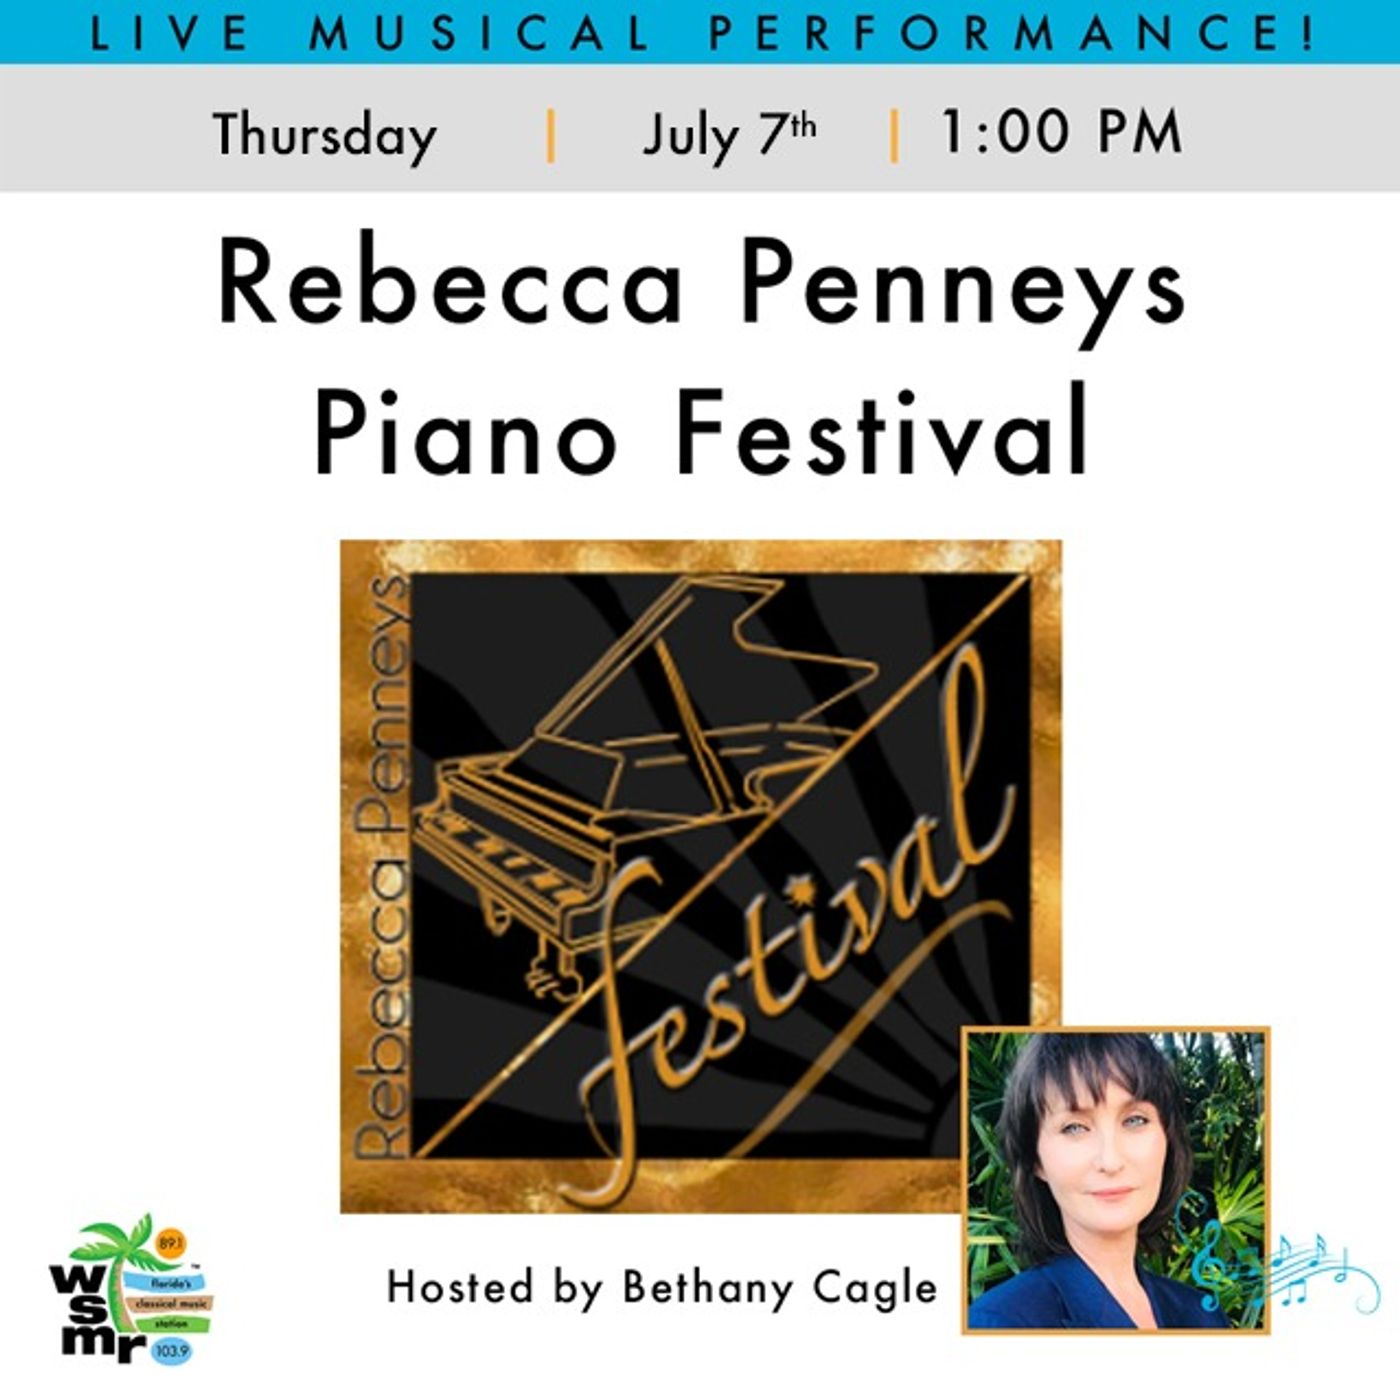 Live Performance – Pianists from the Rebecca Penneys Piano Festival – July 7th, 2022